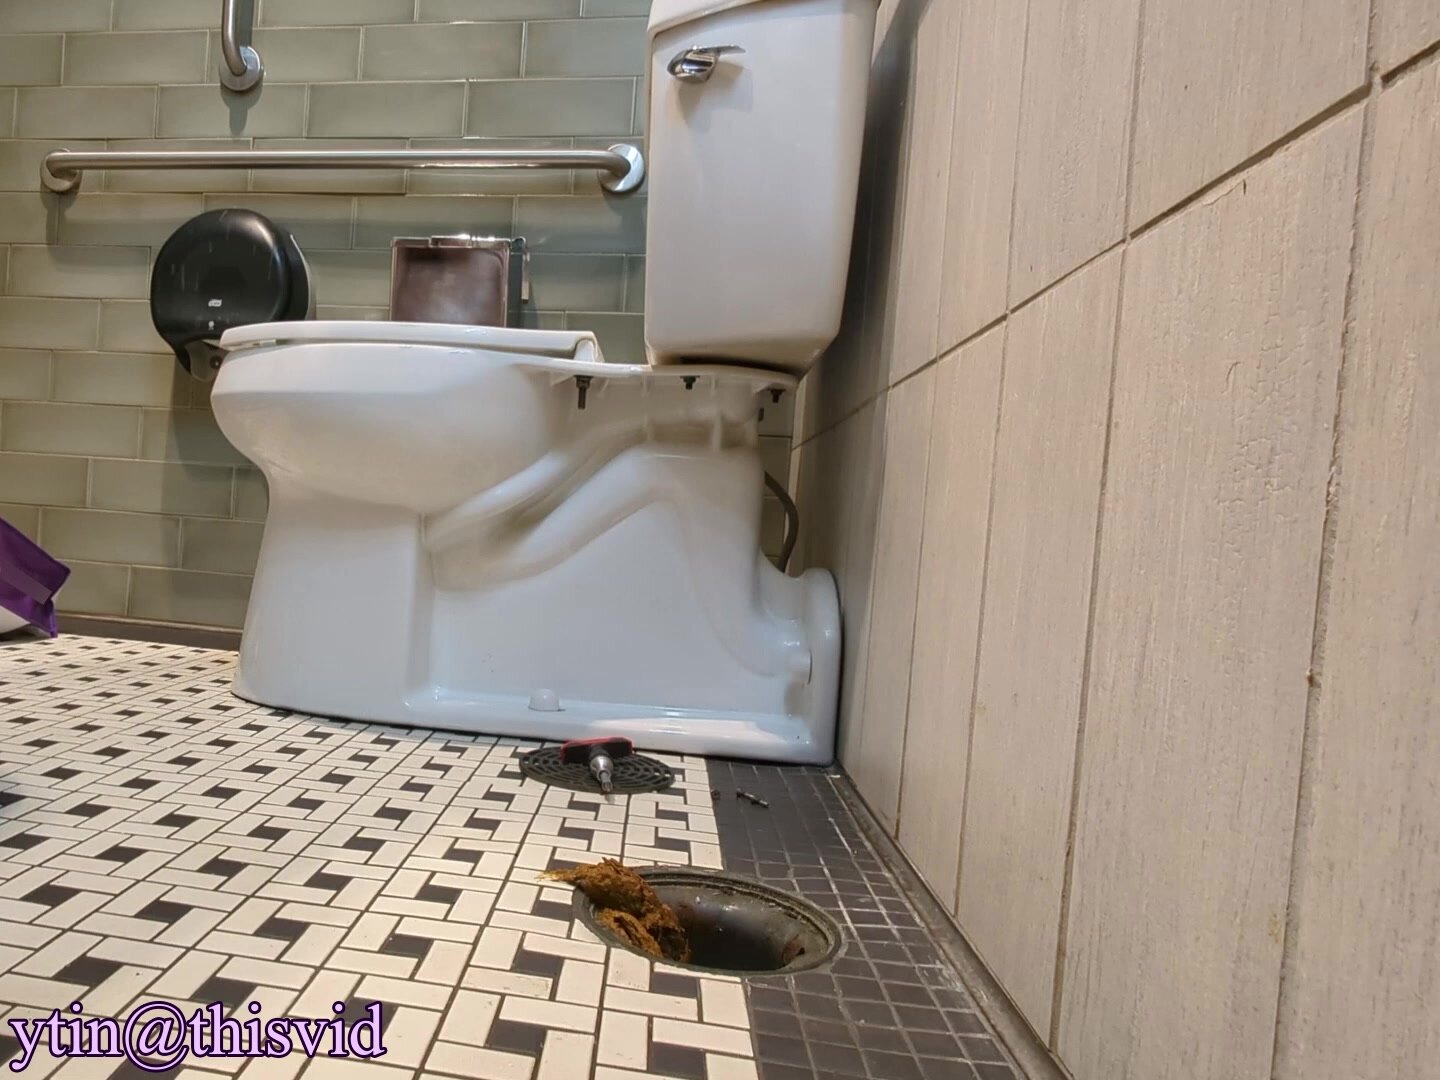 Public Restroom Drain Shit and Piss #3